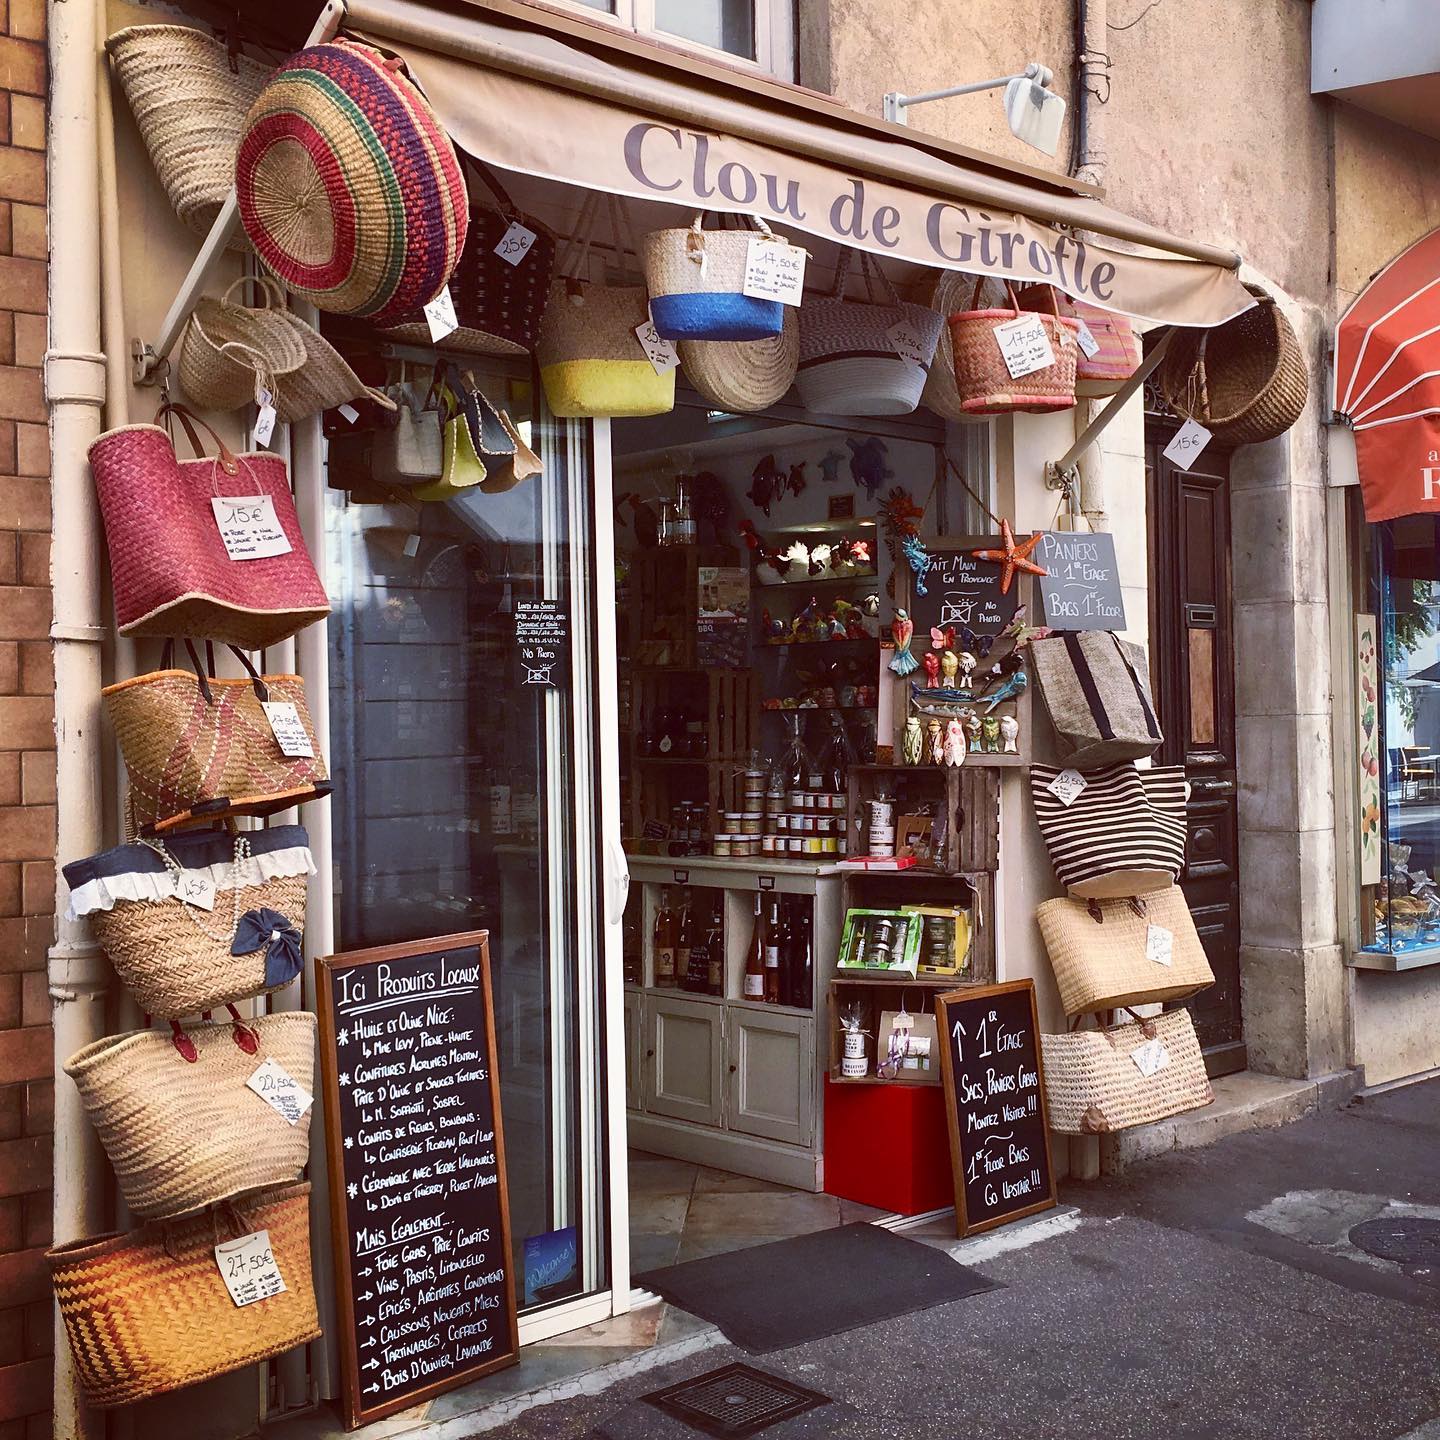 I’m Christmas shopping in our winter hometown in Canada, and I keep thinking it’d be SO MUCH EASIER to find that perfect gift in our summer hometown of Antibes 

 #antibes #cotedazur #frenchriviera #jaimelafrance  #cloudegirofle #frenchshop #makingalistcheckingittwice